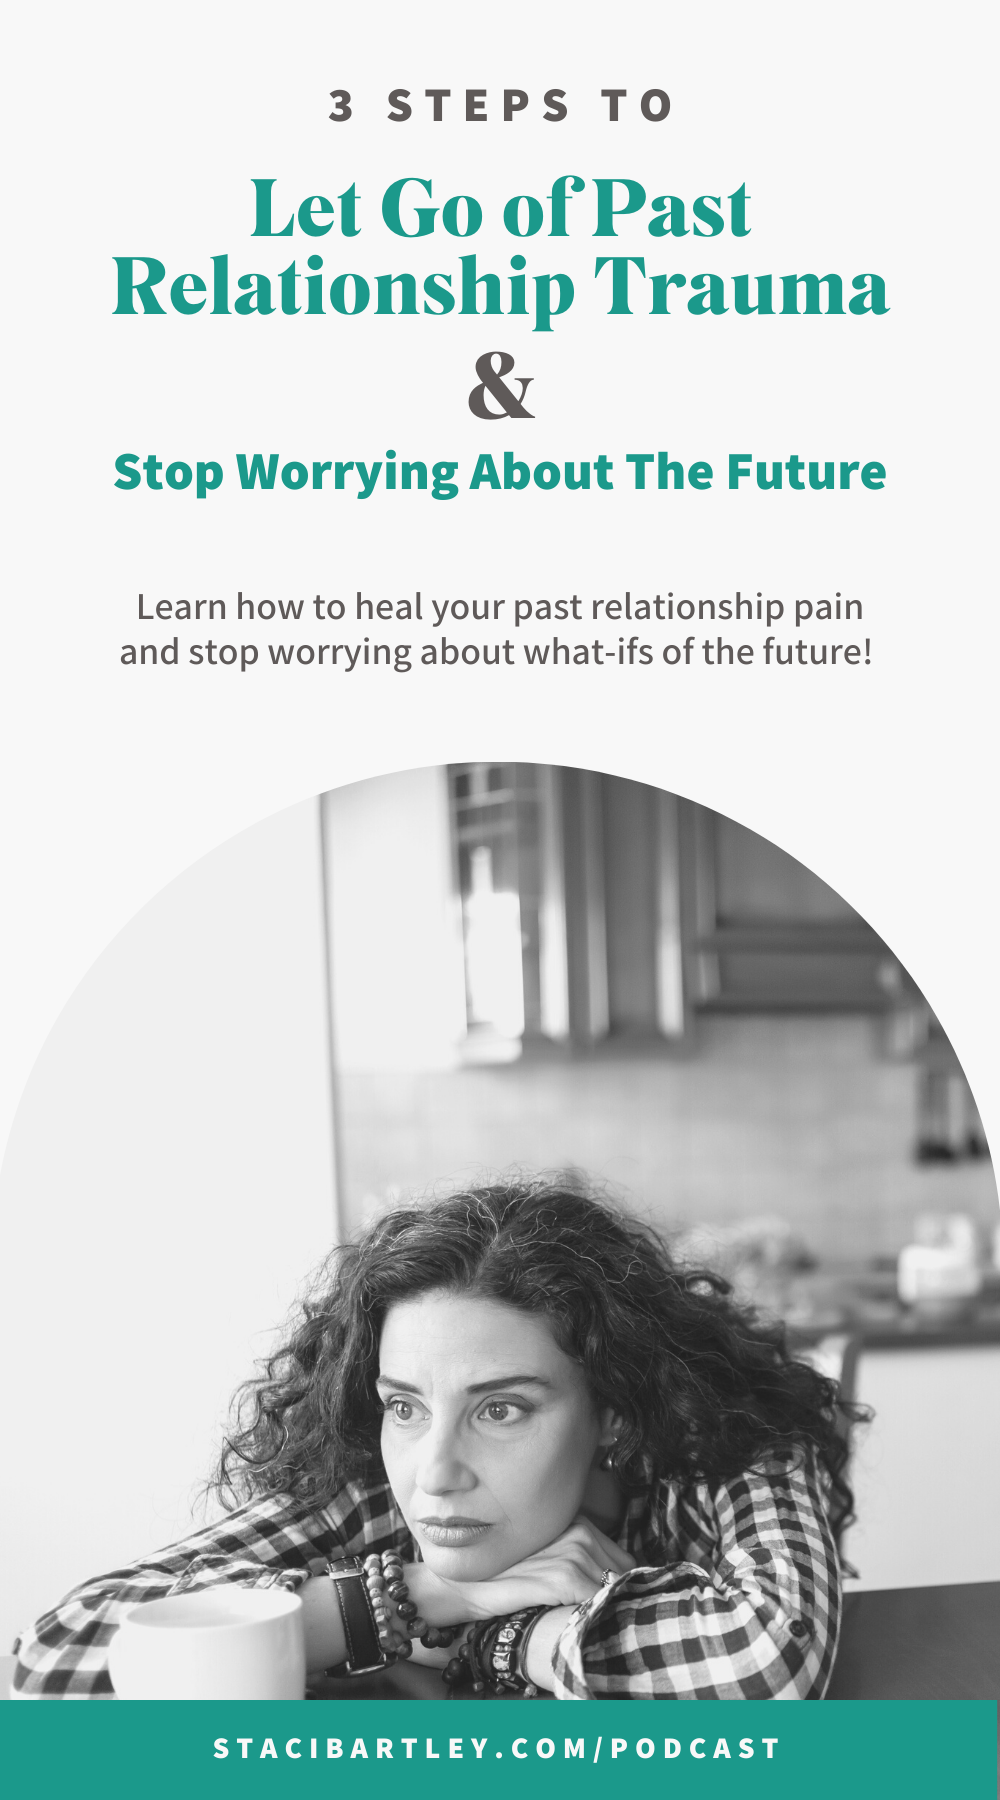 Let Go of Past Relationship Trauma